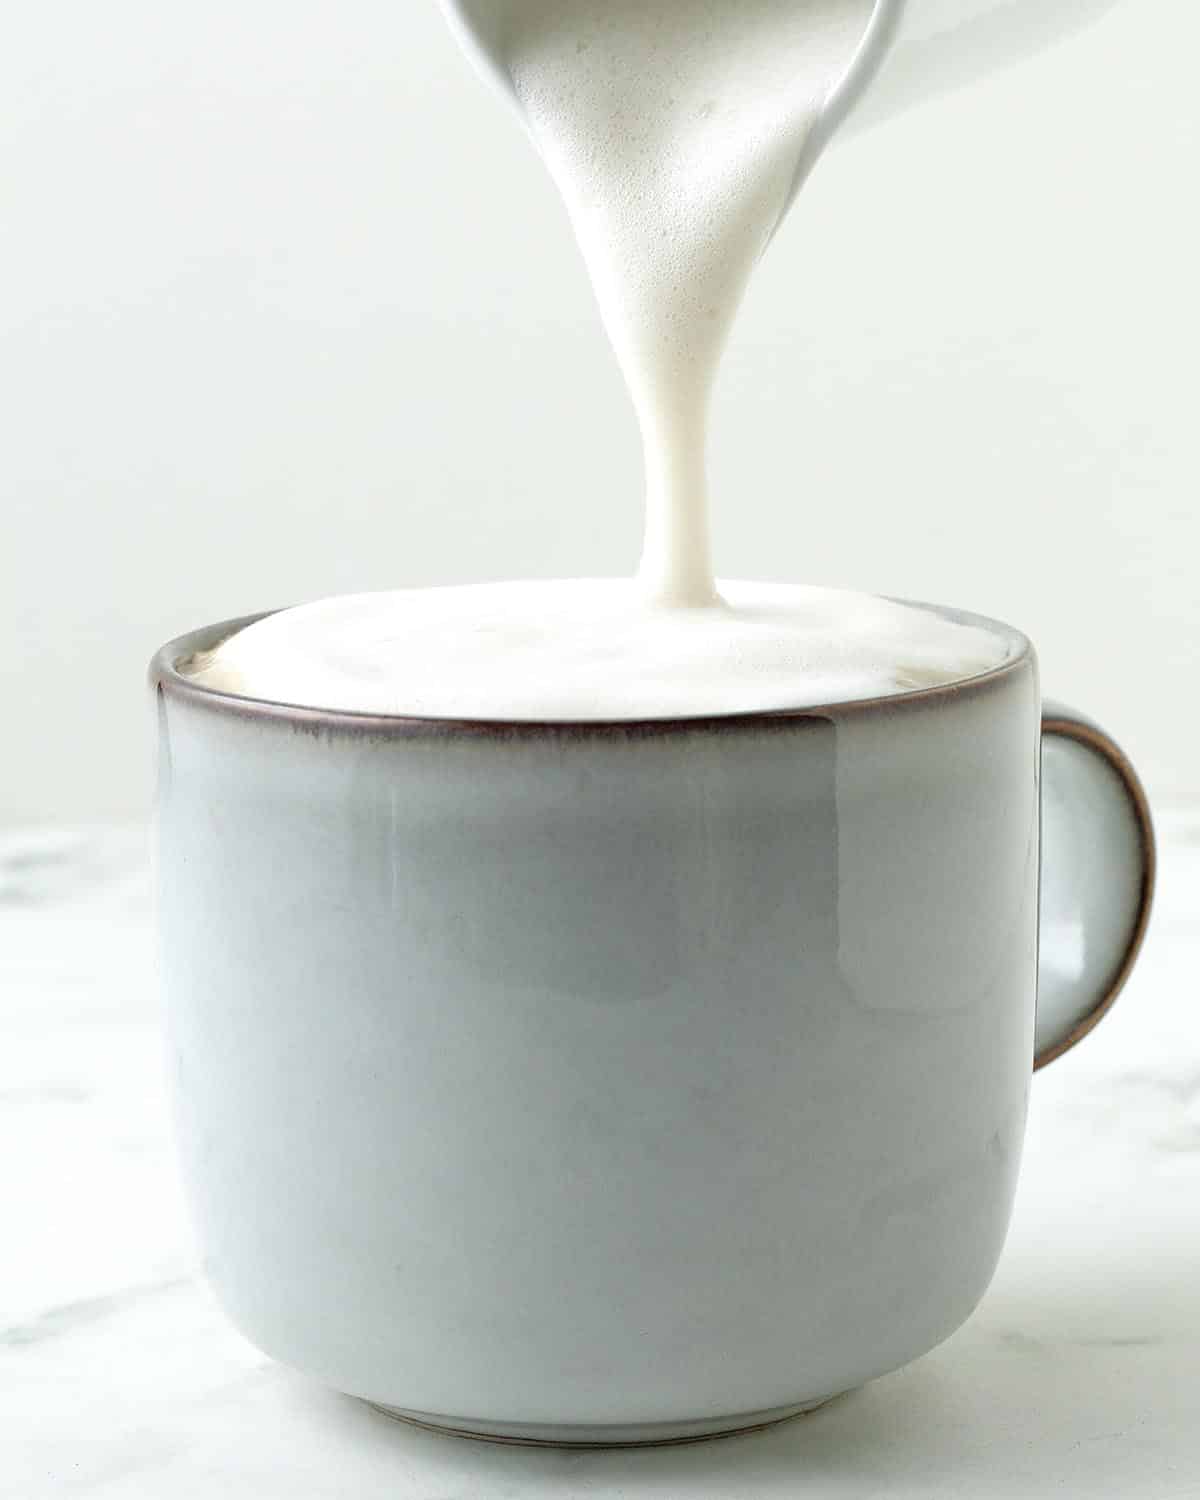 Foamed milk being poured on top of a chai latte in a mug.